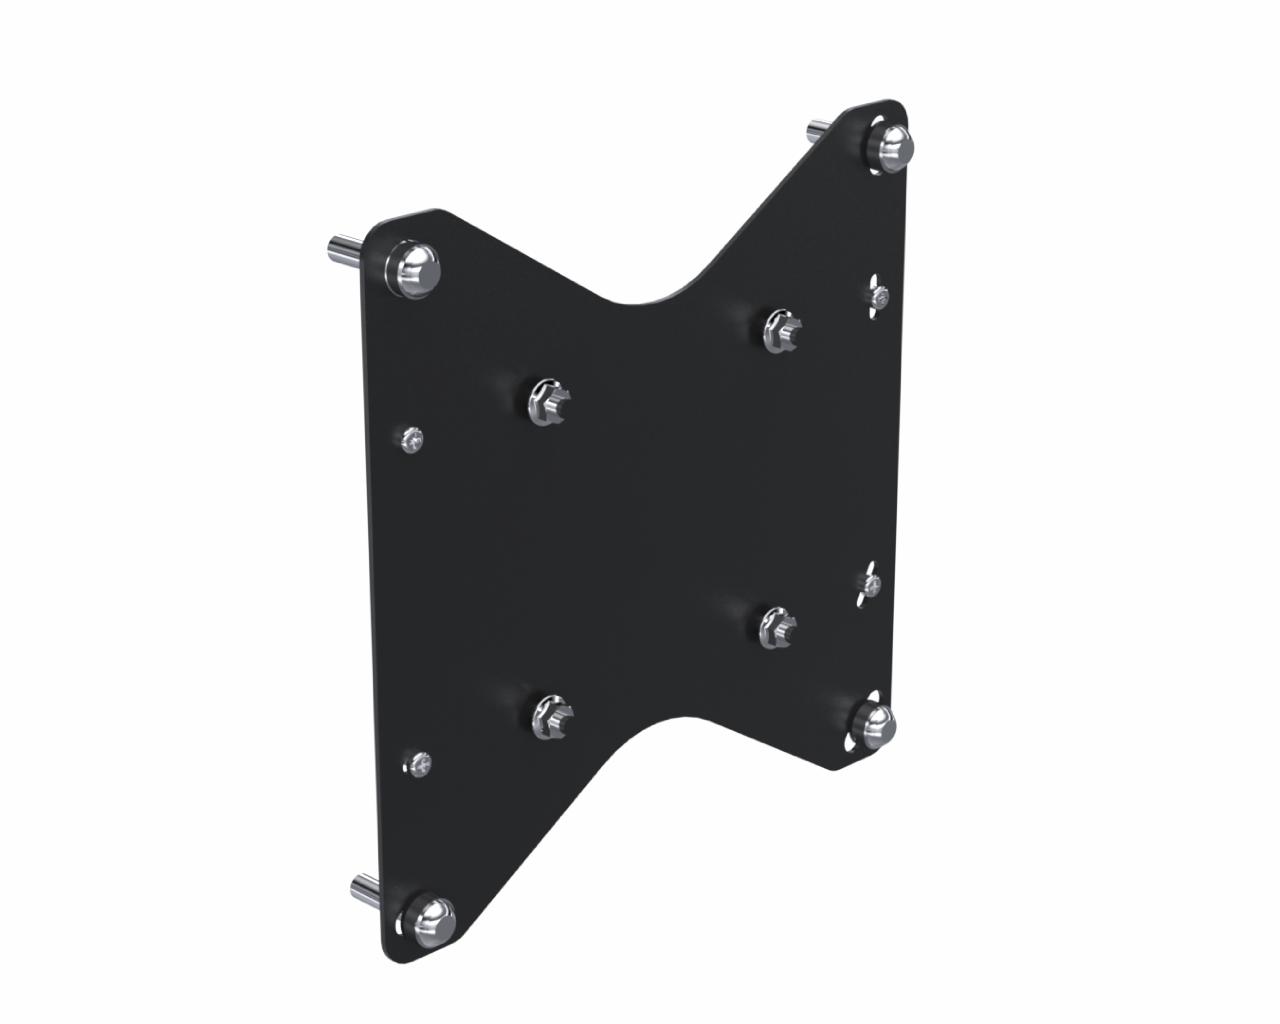 VESA 100 to 200 adapter for ceiling pole​